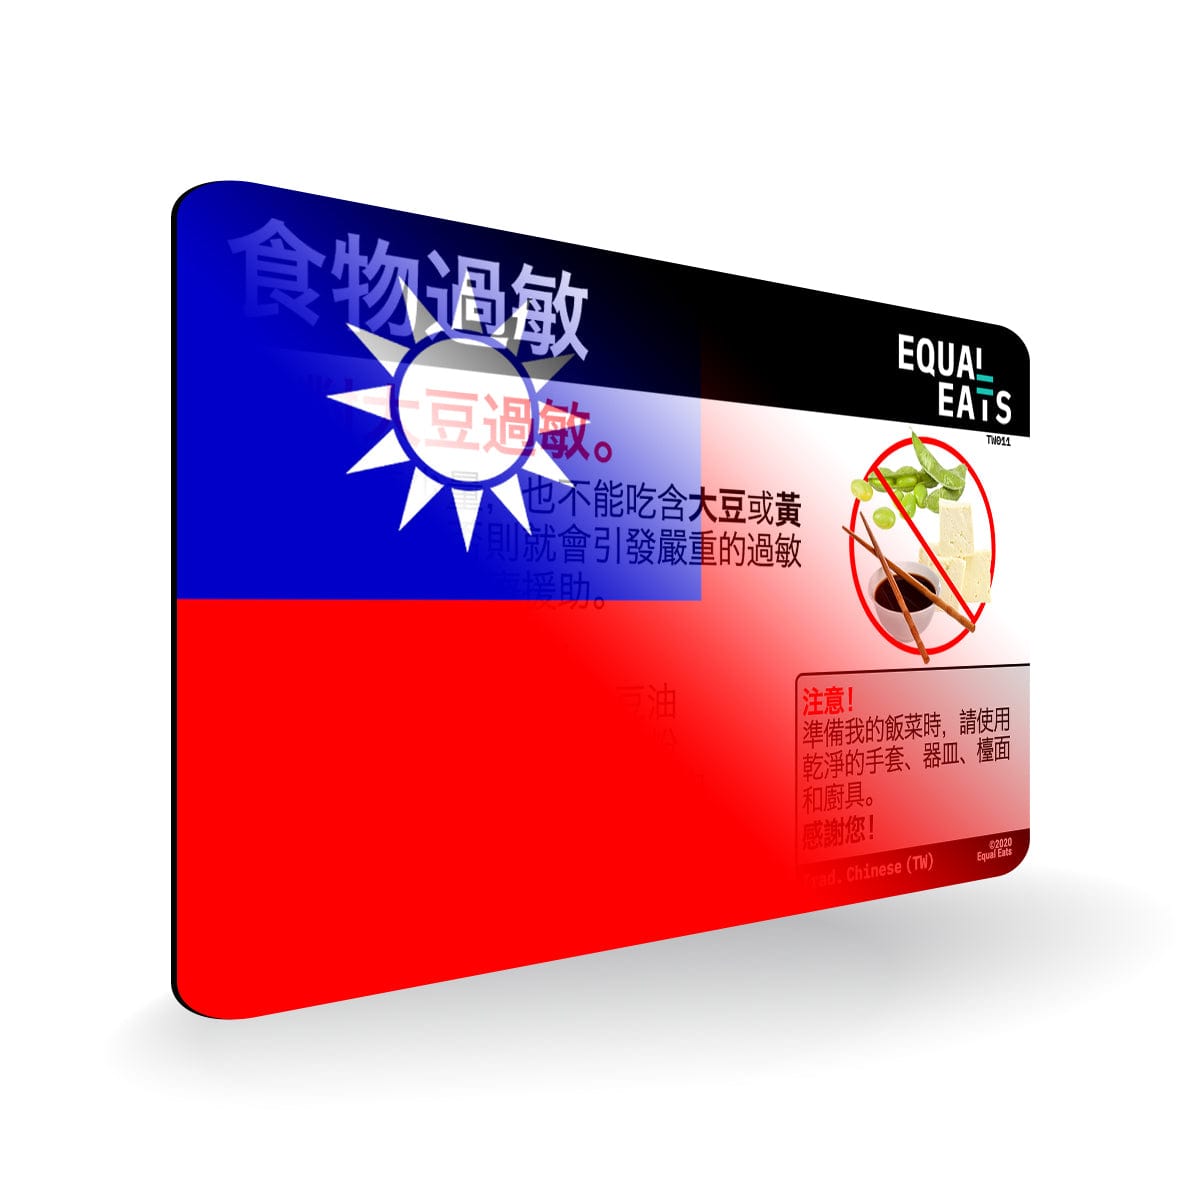 Soy Allergy in Traditional Chinese. Soy Allergy Card for Taiwan